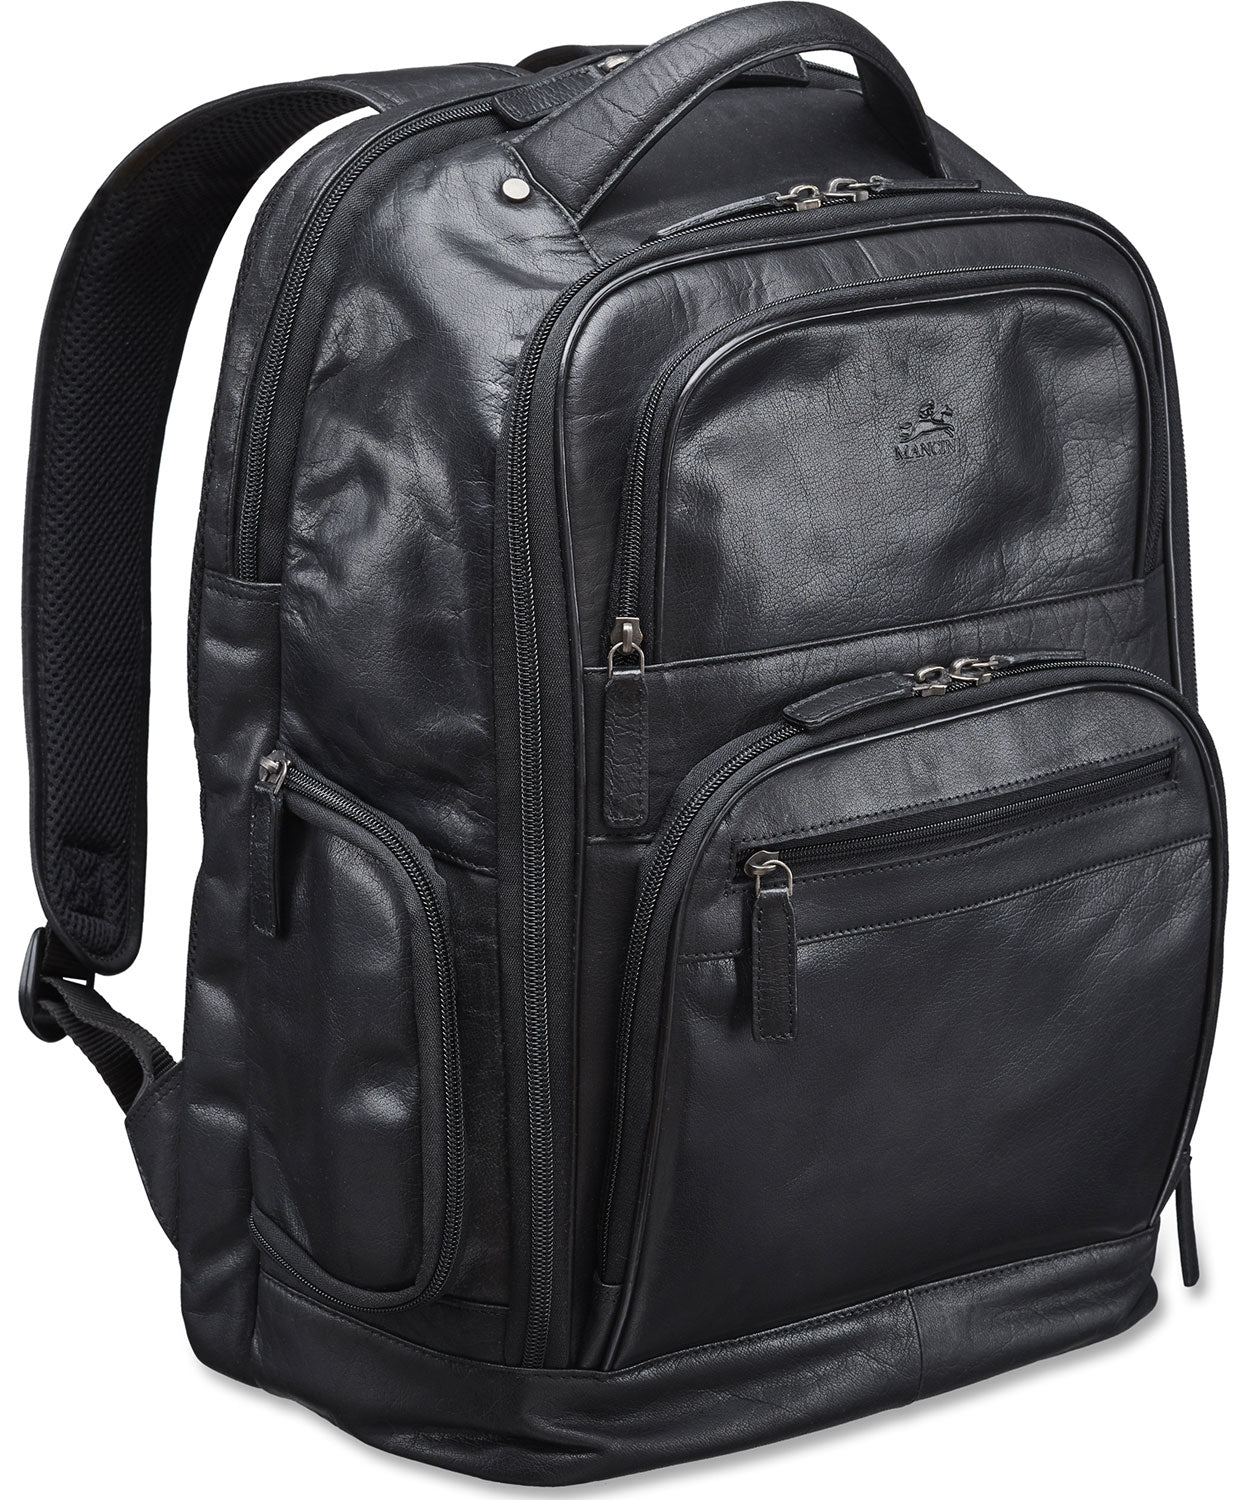 Mancini Leather Backpack for 15.6" Laptop with RFID Secure Pocket, 12.5" x 7" x 17.5", Black